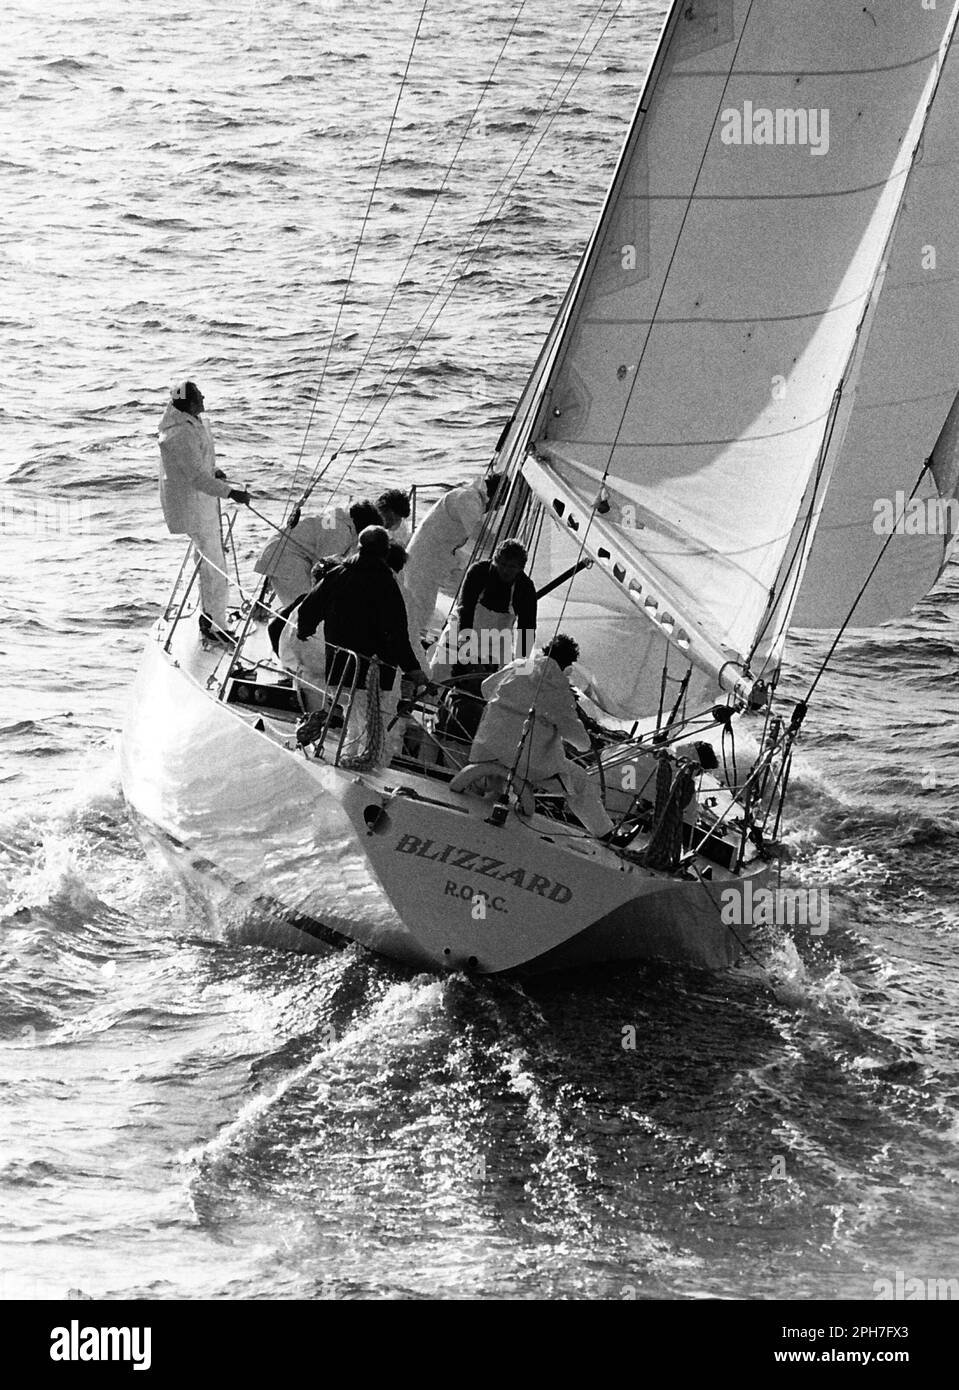 AJAXNETPHOTO. 16TH JUNE, 1979. CHANNEL, ENGLAND. - ROUND THE ISLAND RACE - BLIZZARD BRITISH ADMIRAL'S CUP CONTENDER.  PHOTO:JONATHAN EASTLAND/AJAX REF:MX340 220605 105 Stock Photo